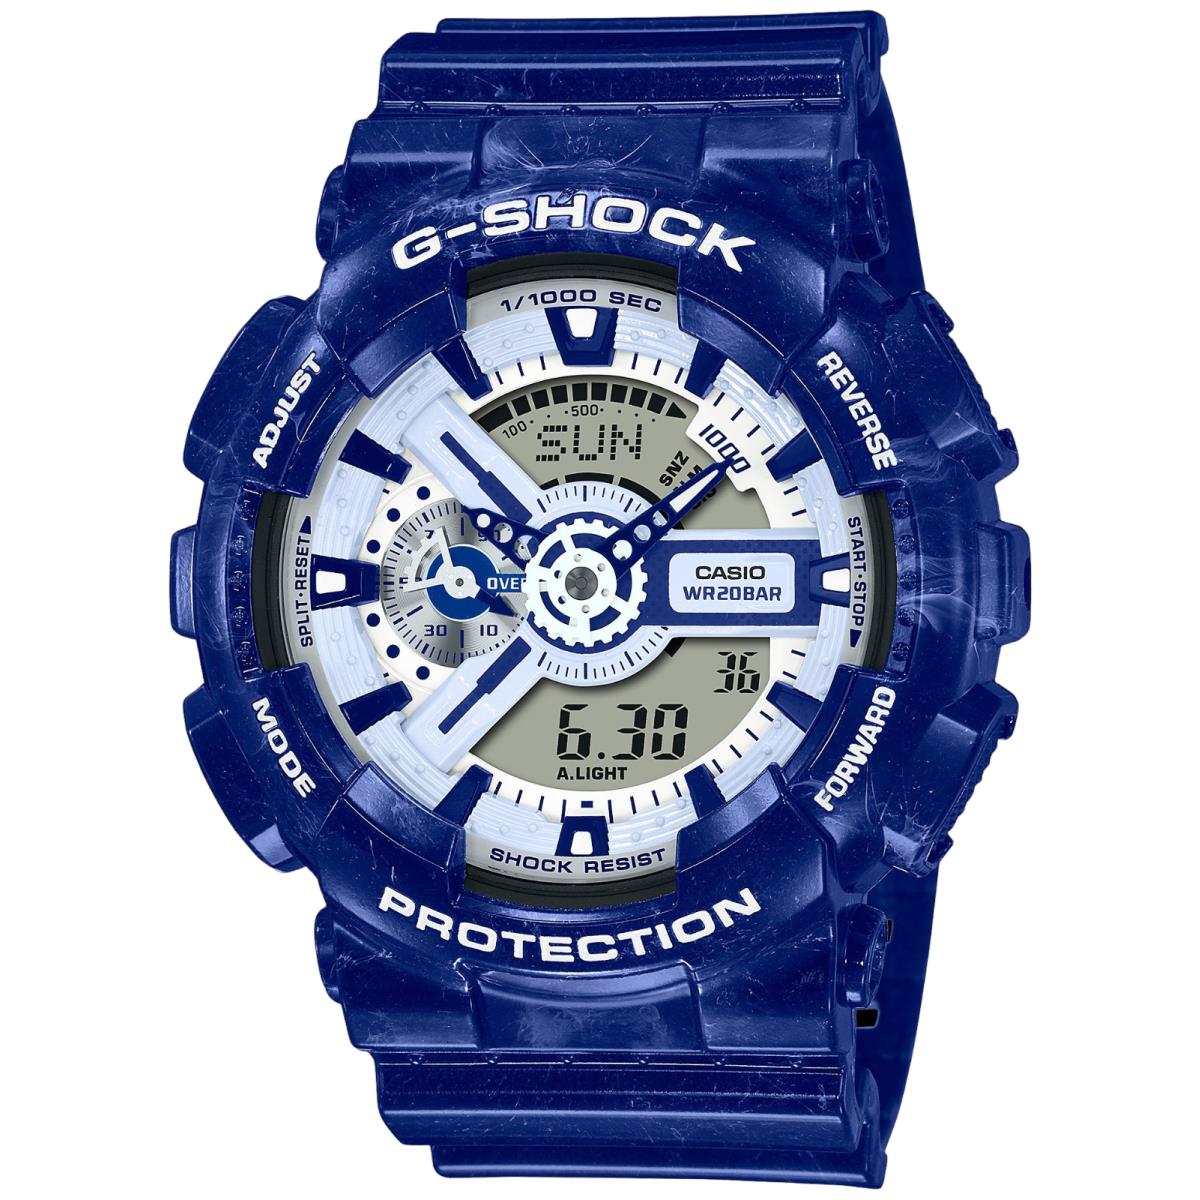 Casio G-shock GA110BWP-2A Blue and White Chinese Porcelain Ceramic Dragon Watch